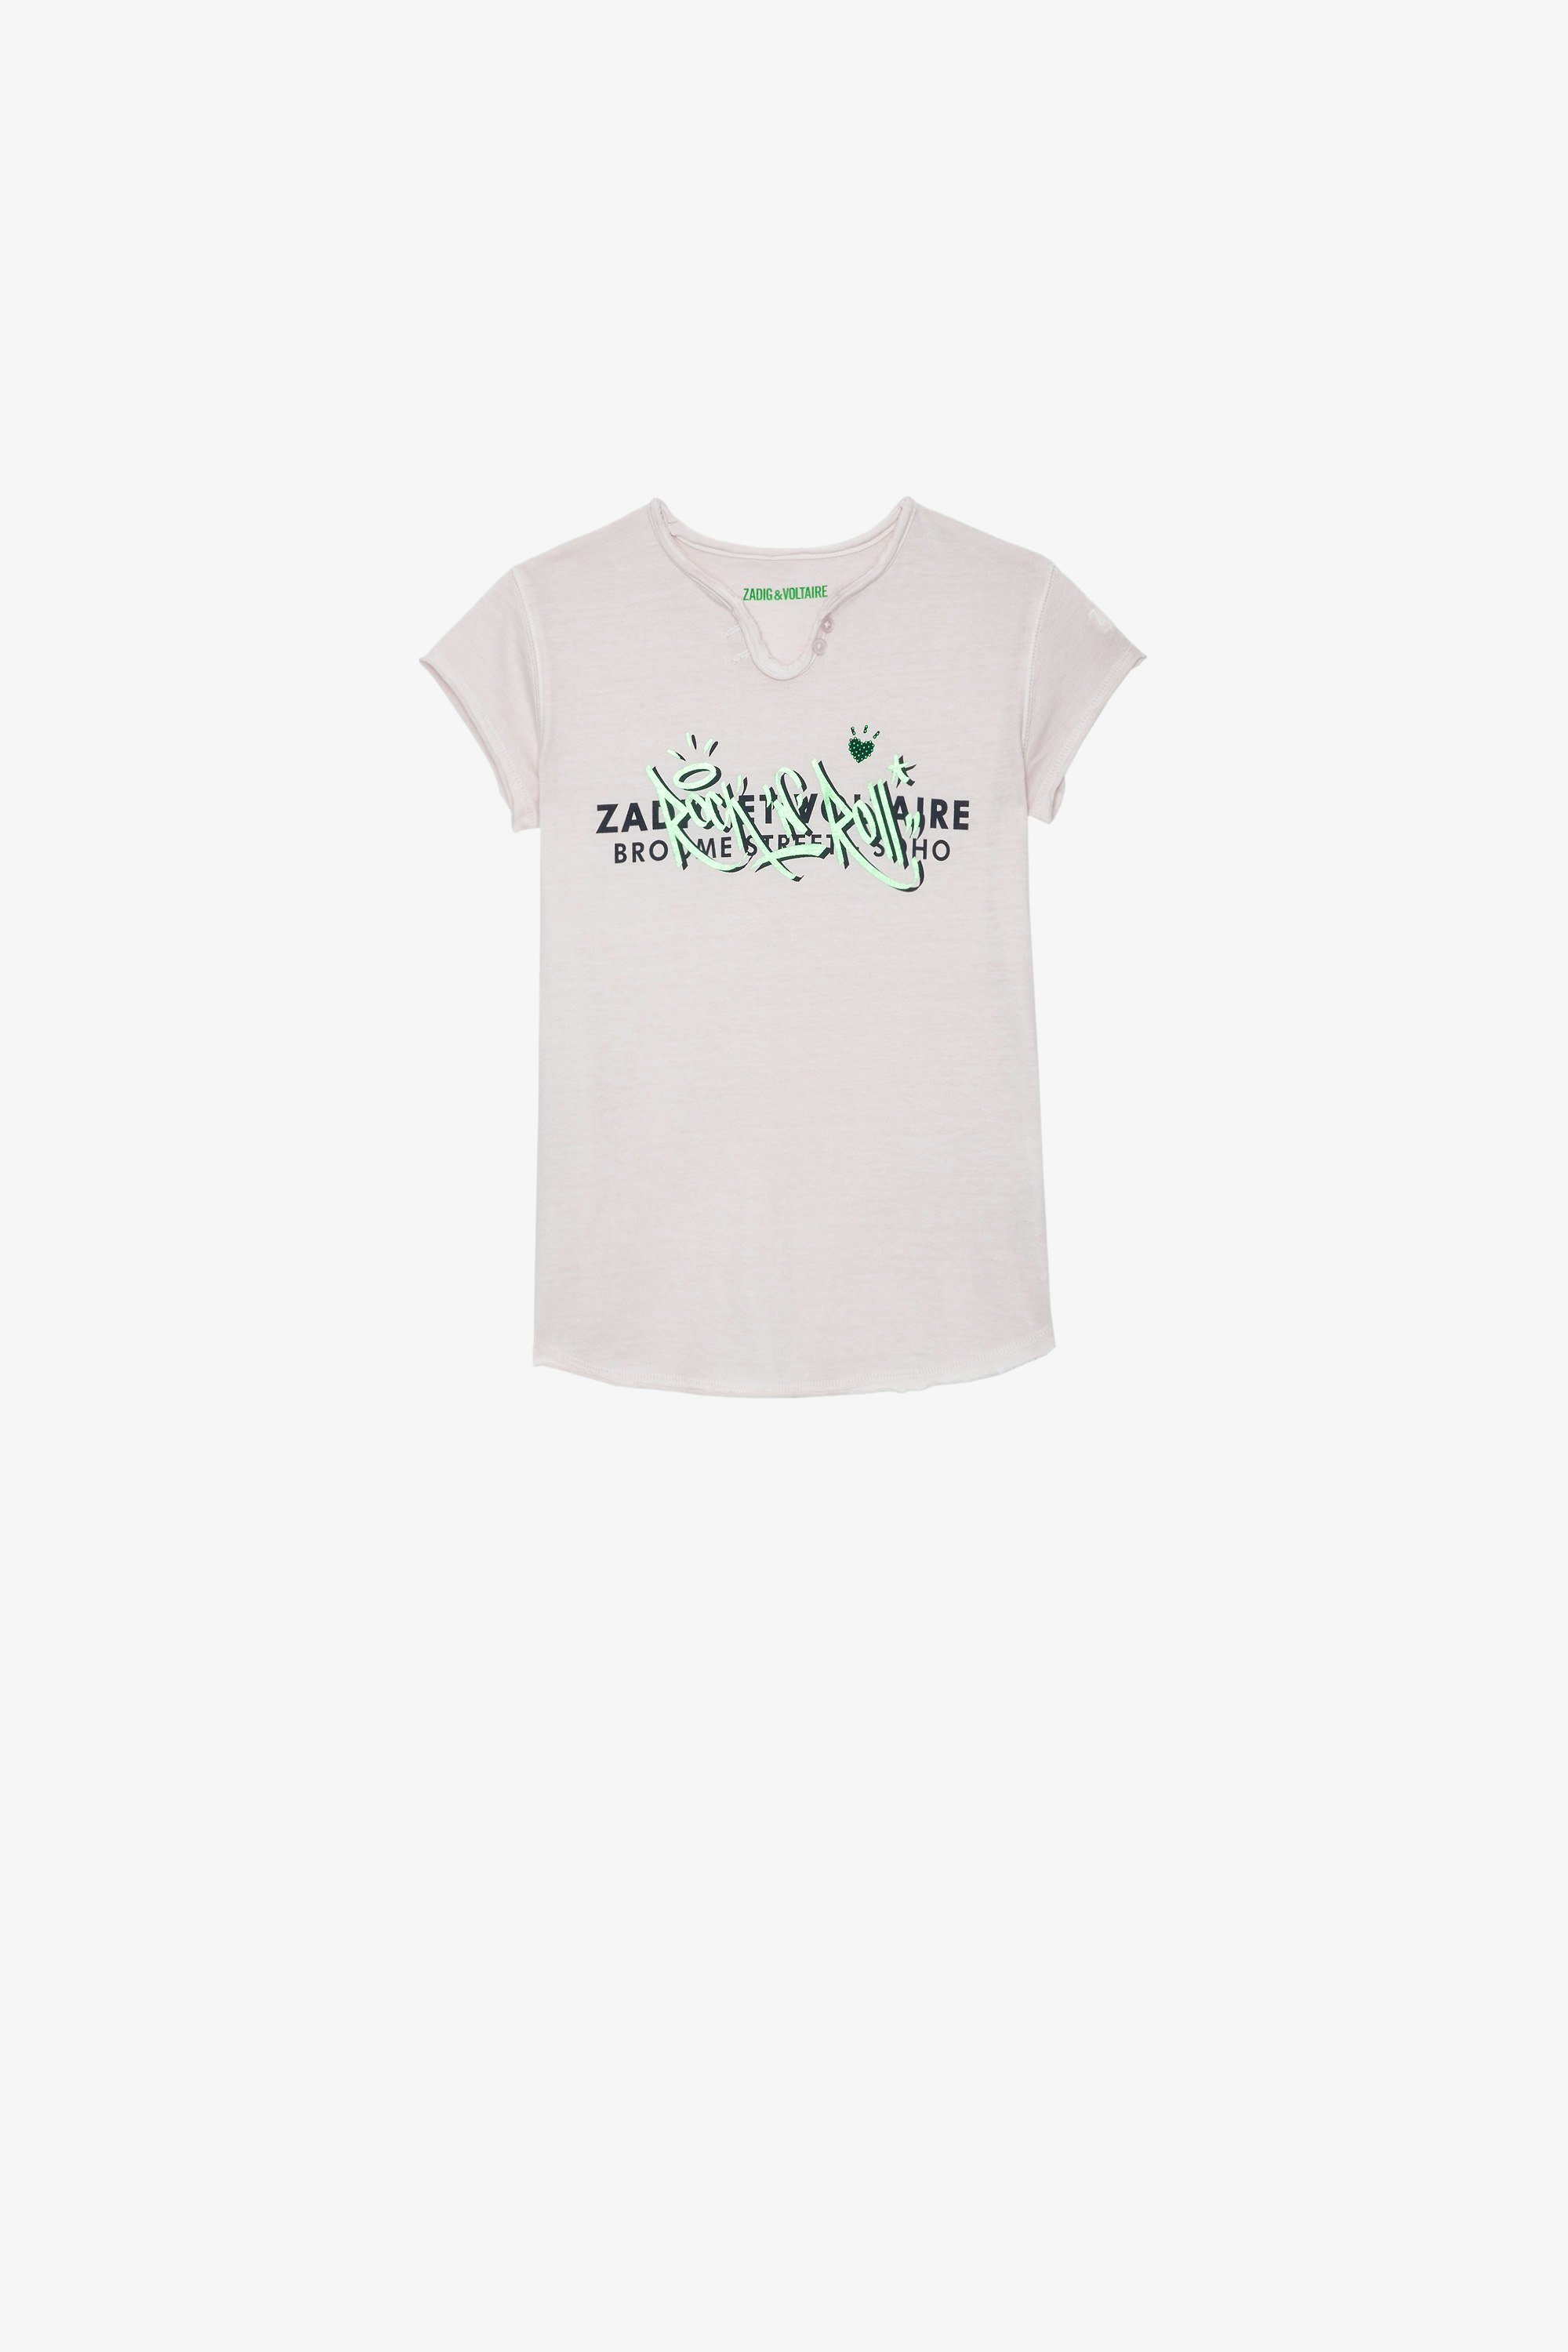 Boxo Kids' T-Shirt Kids’ T-shirt in pink cotton jersey with a metallic-effect crystal-studded print and embroidery